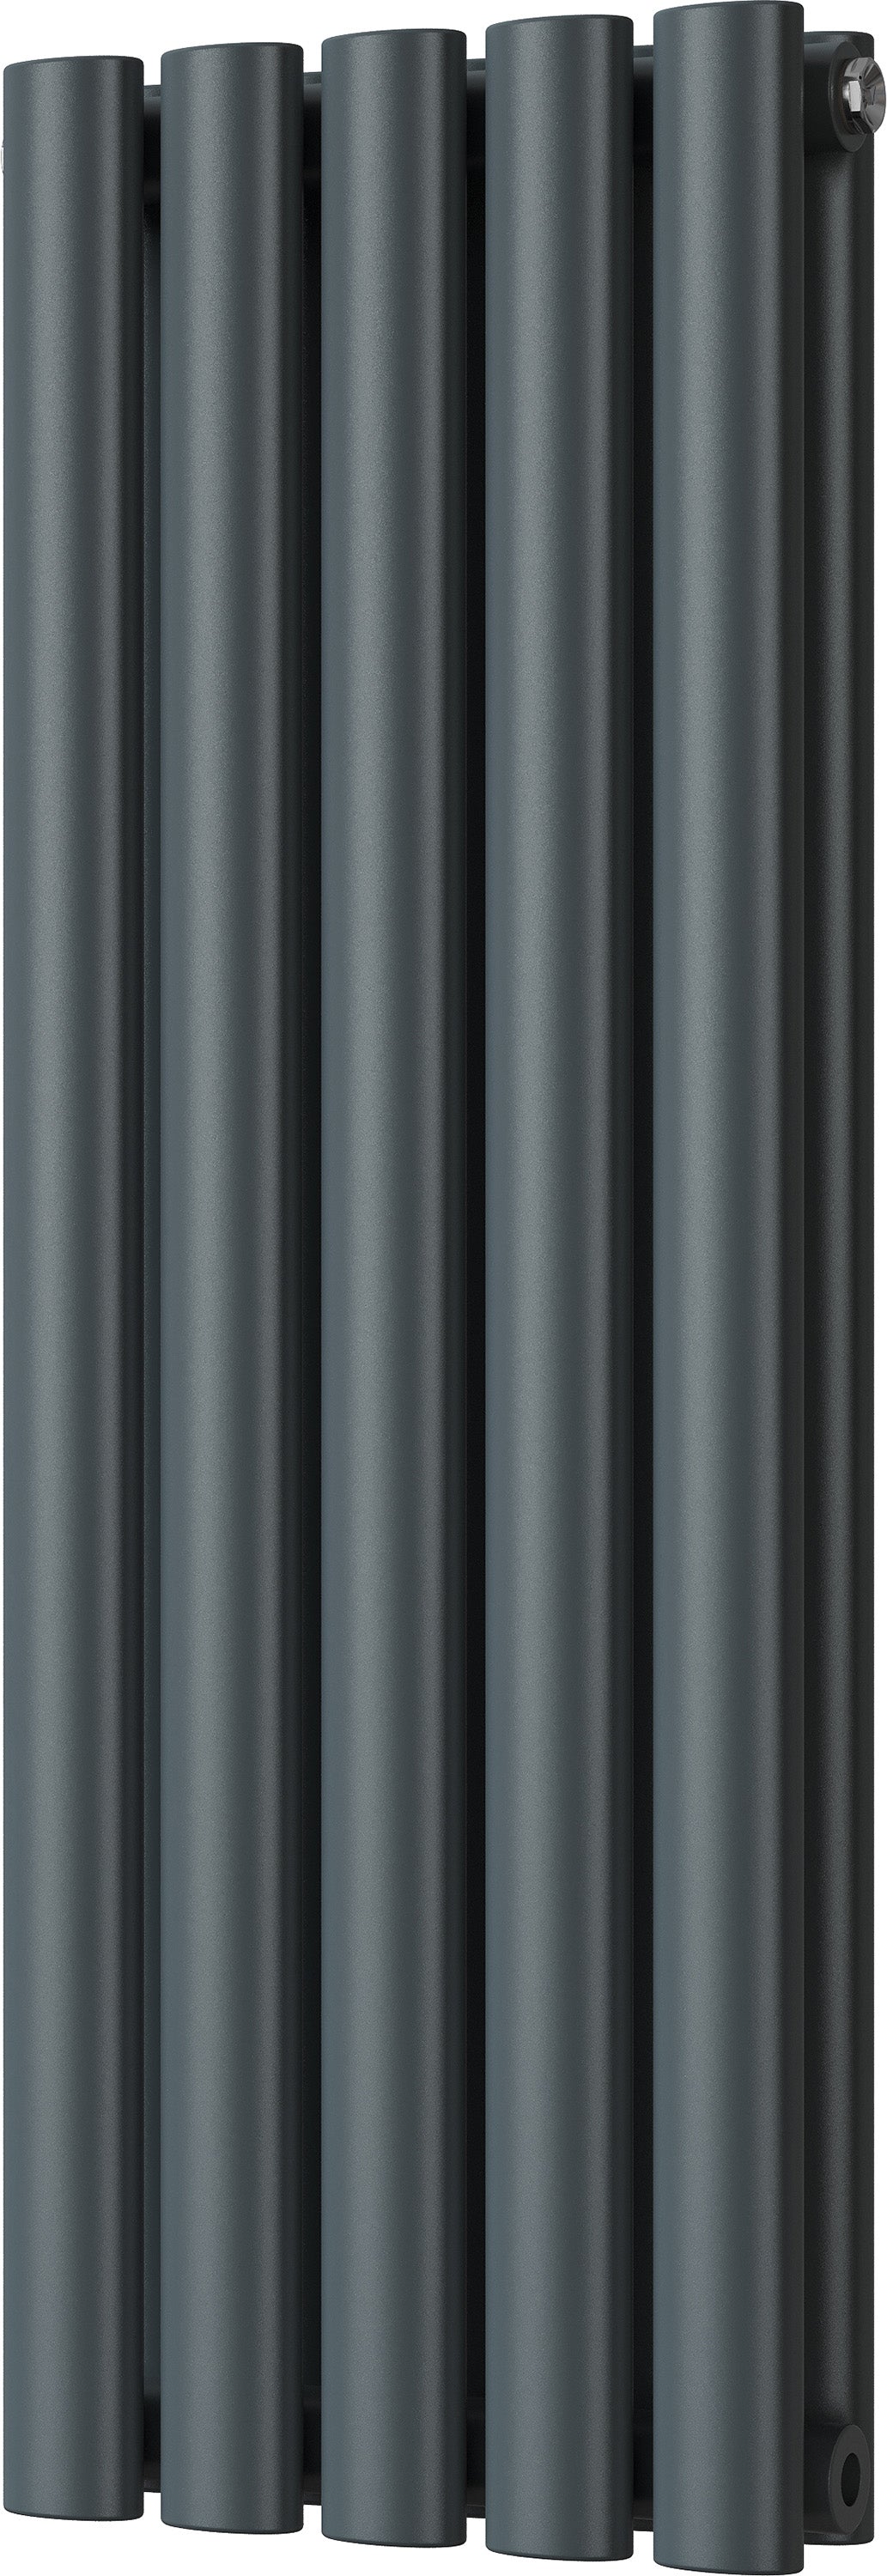 Omeara - Anthracite Designer Radiator H800mm x W290mm Double Panel